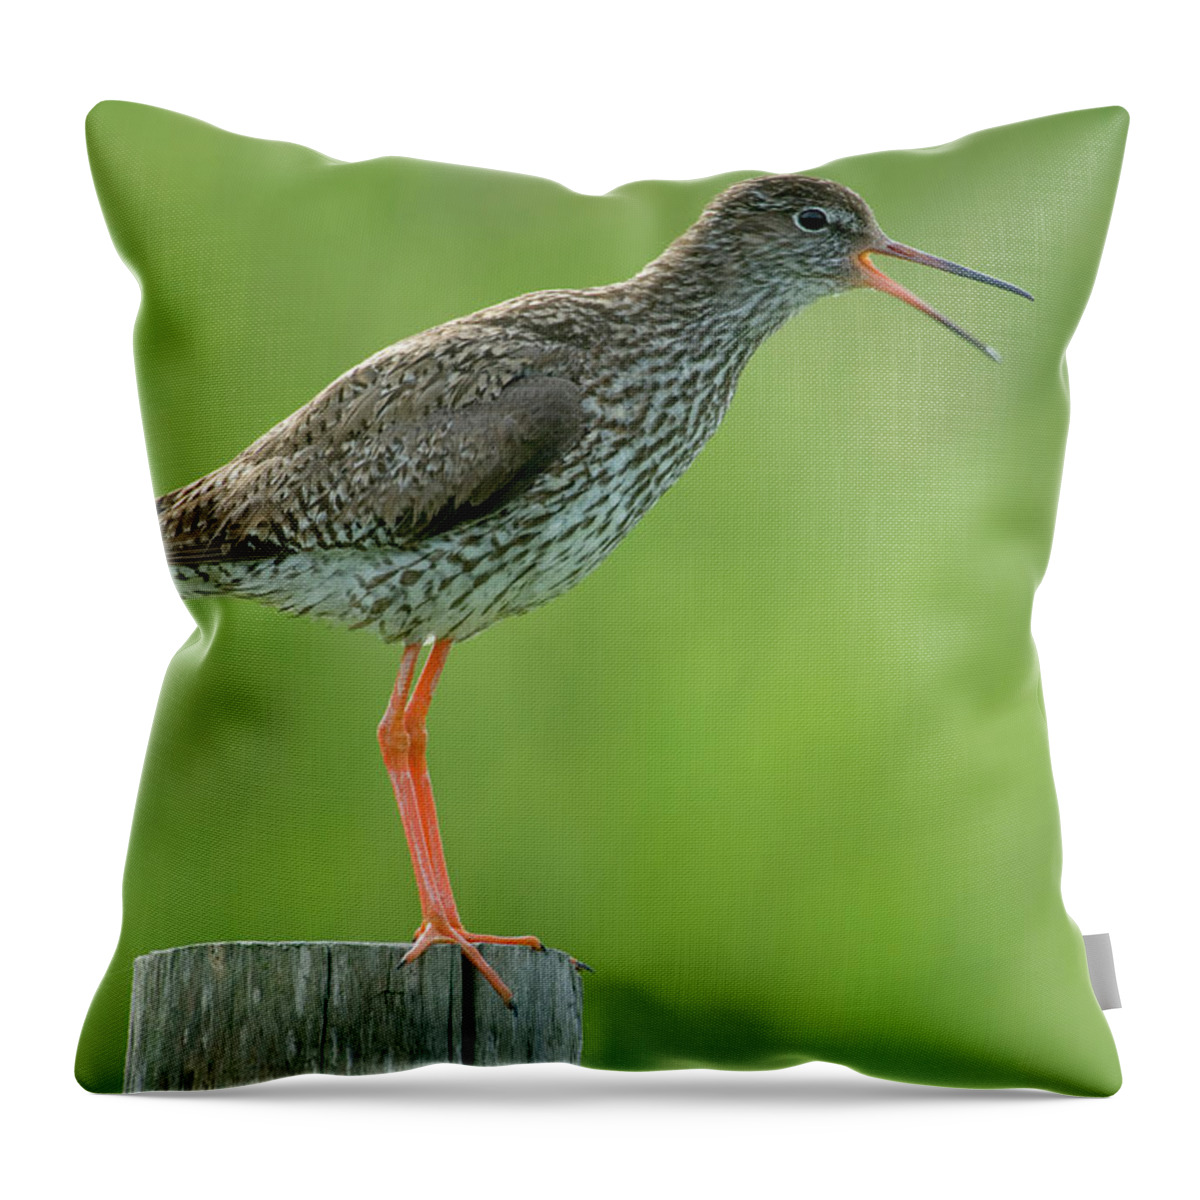 00286624 Throw Pillow featuring the photograph Common Redshank Calling by Do Van Dijck